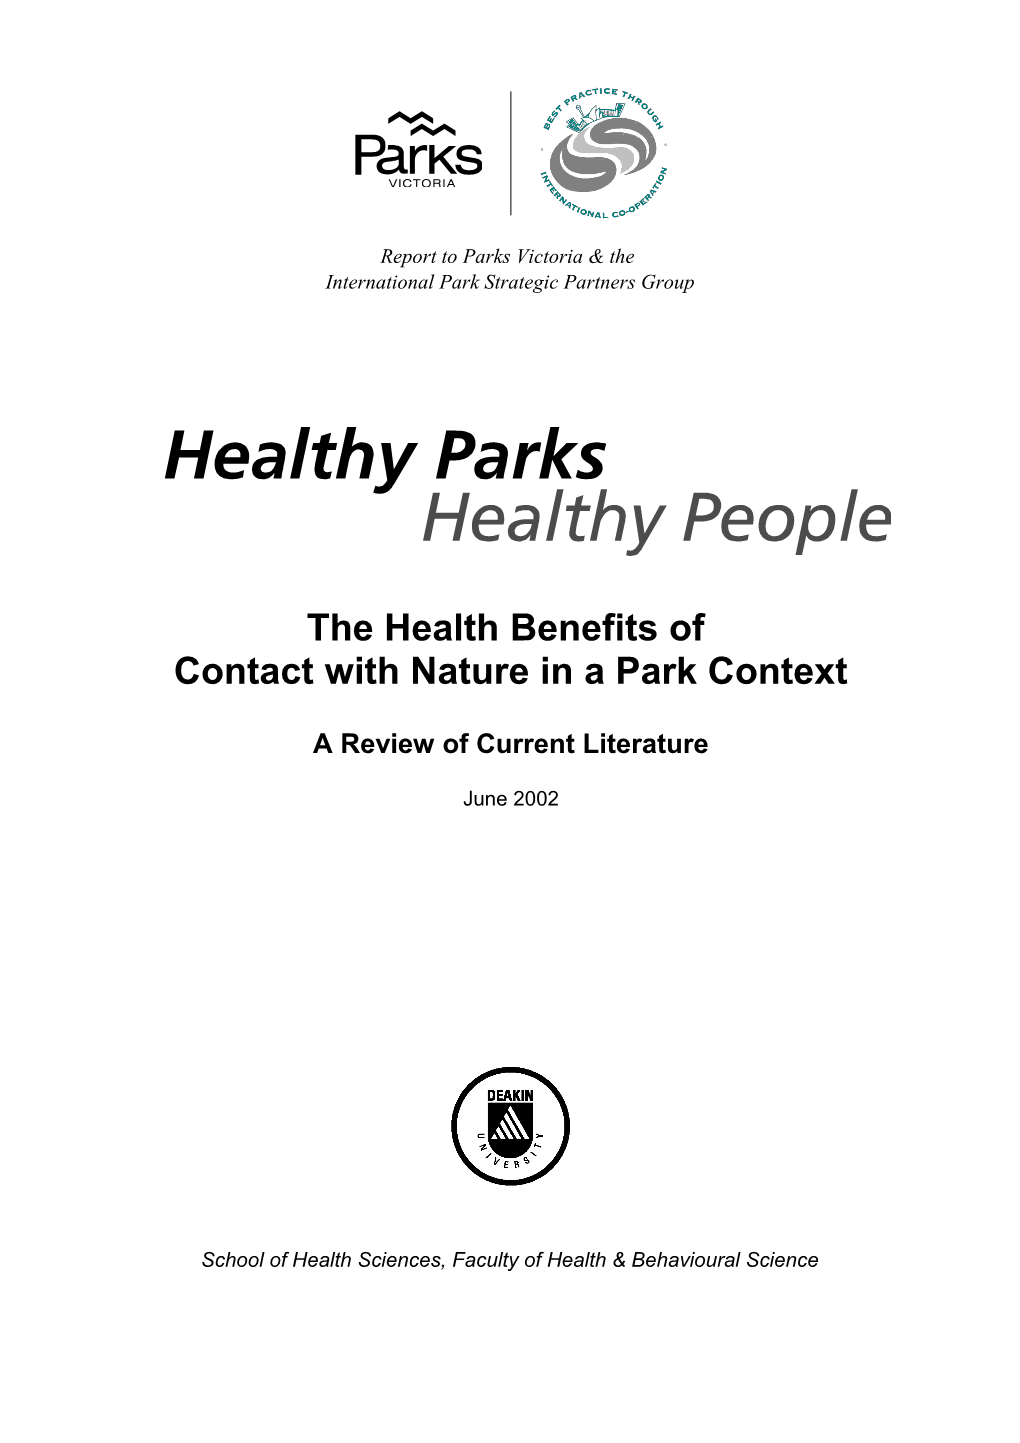 Report To Parks Victoria & The International Strategic Partners Group